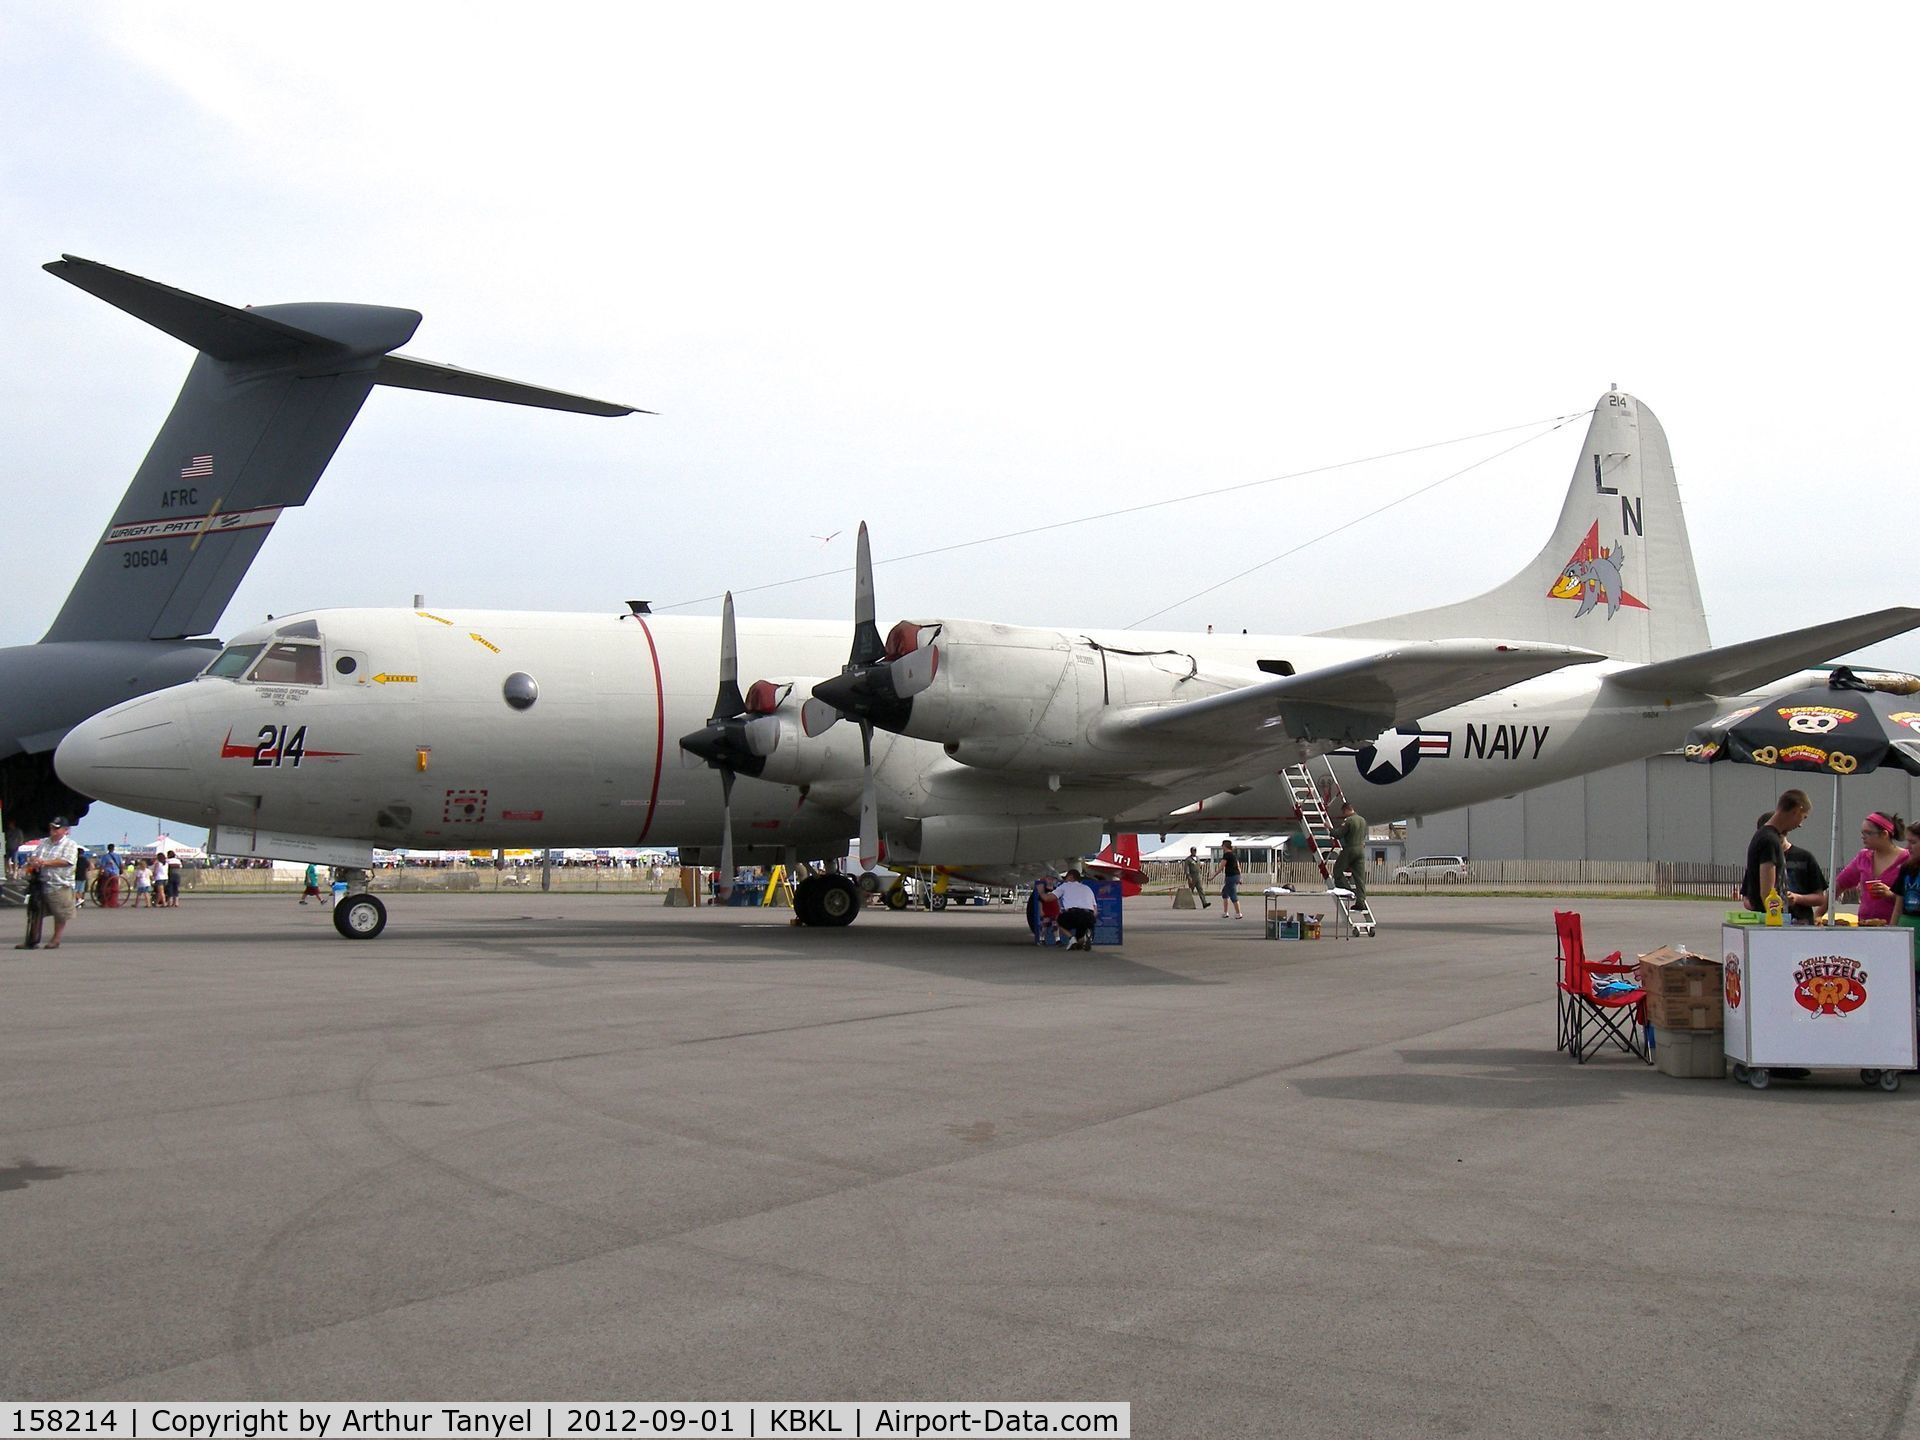 158214, Lockheed P-3C Orion C/N 285A-5559, On display @ 2012 Cleveland International Air Show